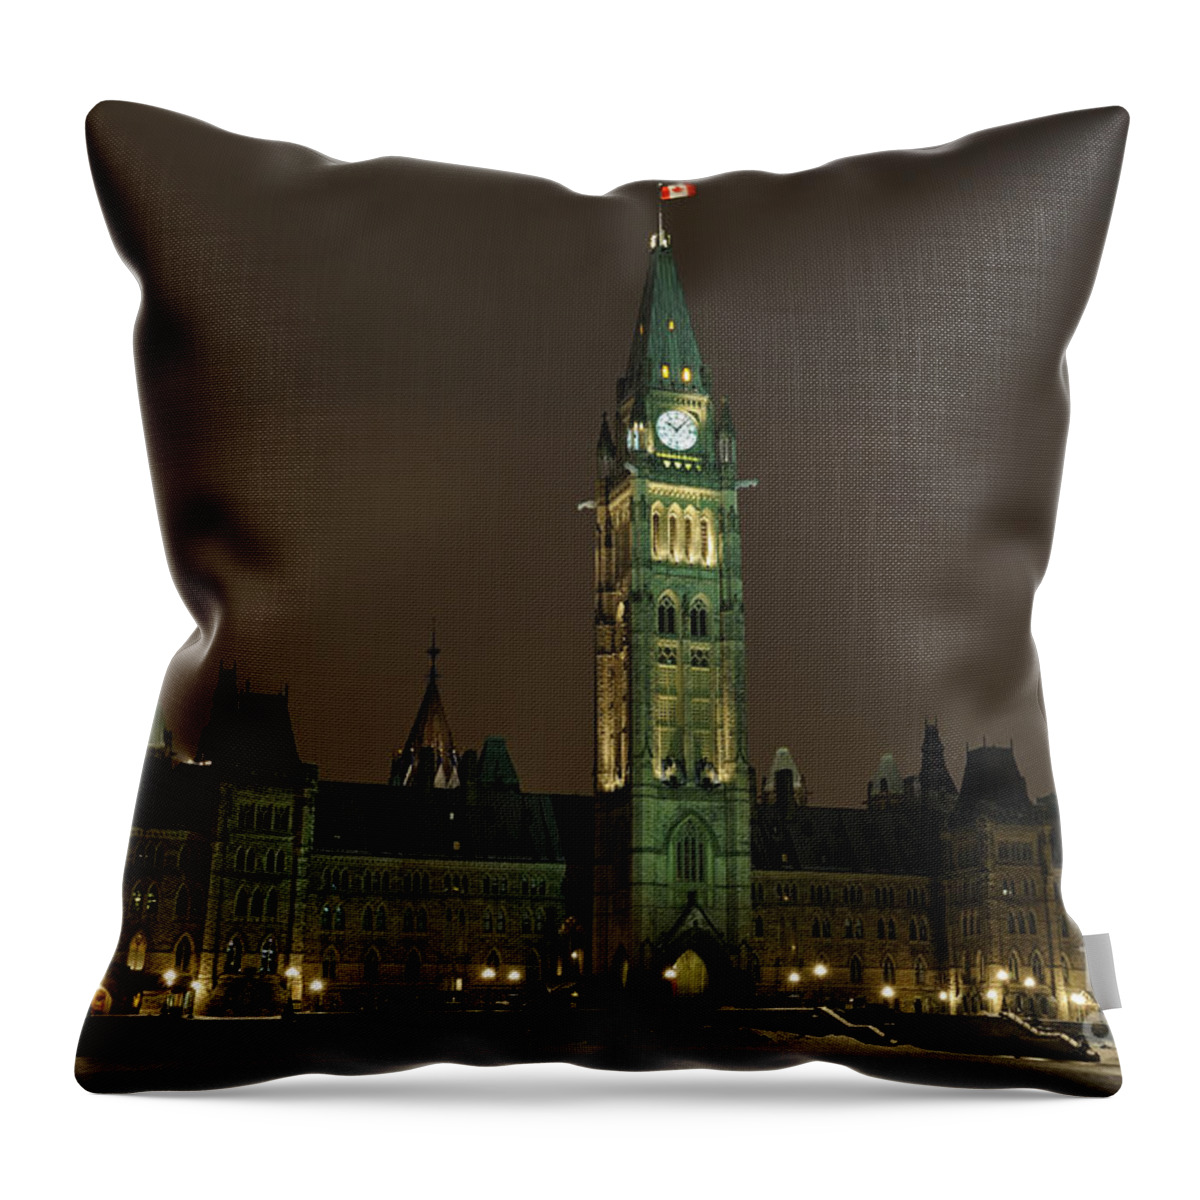 Parliament Hill Throw Pillow featuring the photograph Parliament Hill by Nina Stavlund